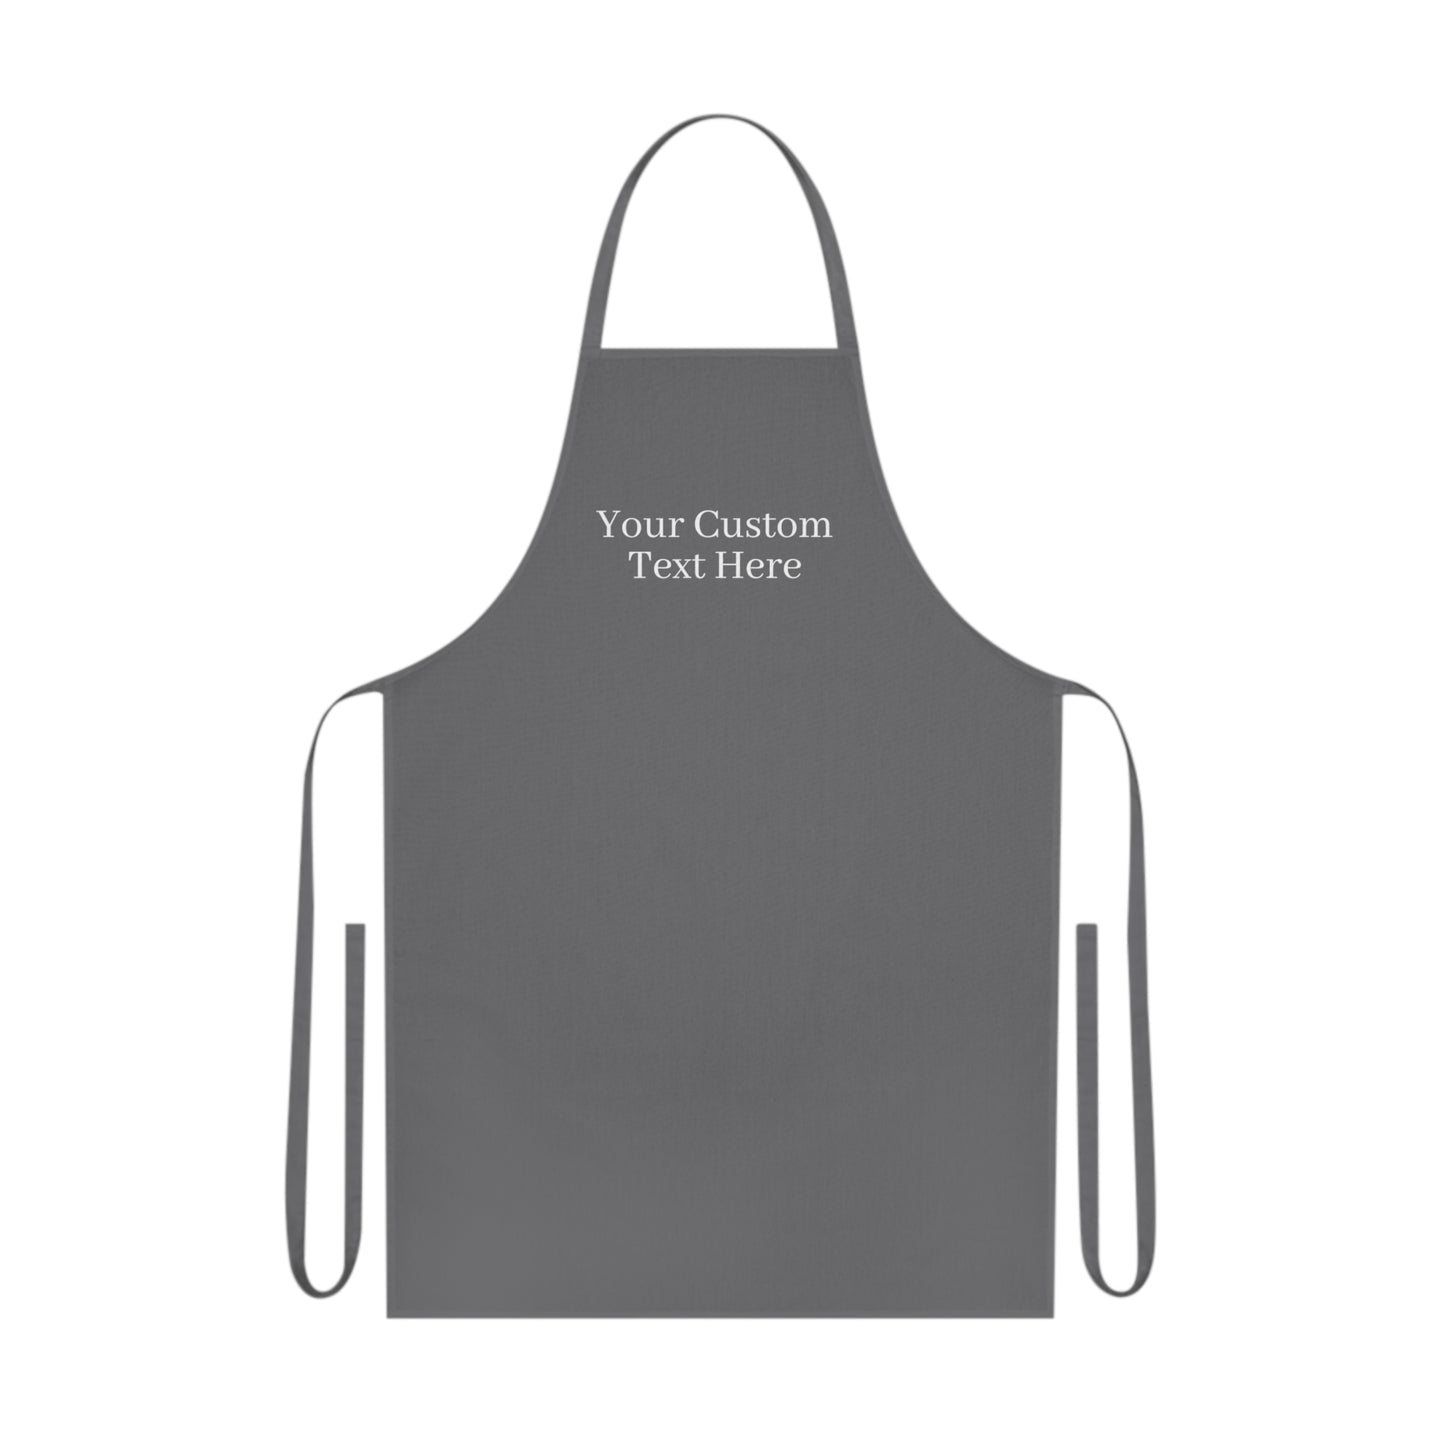 Custom Aprons for Womens Aprons Ruffled with Pockets Hostess Gift Ideas Personalized Apron Pink Aprons Personalized